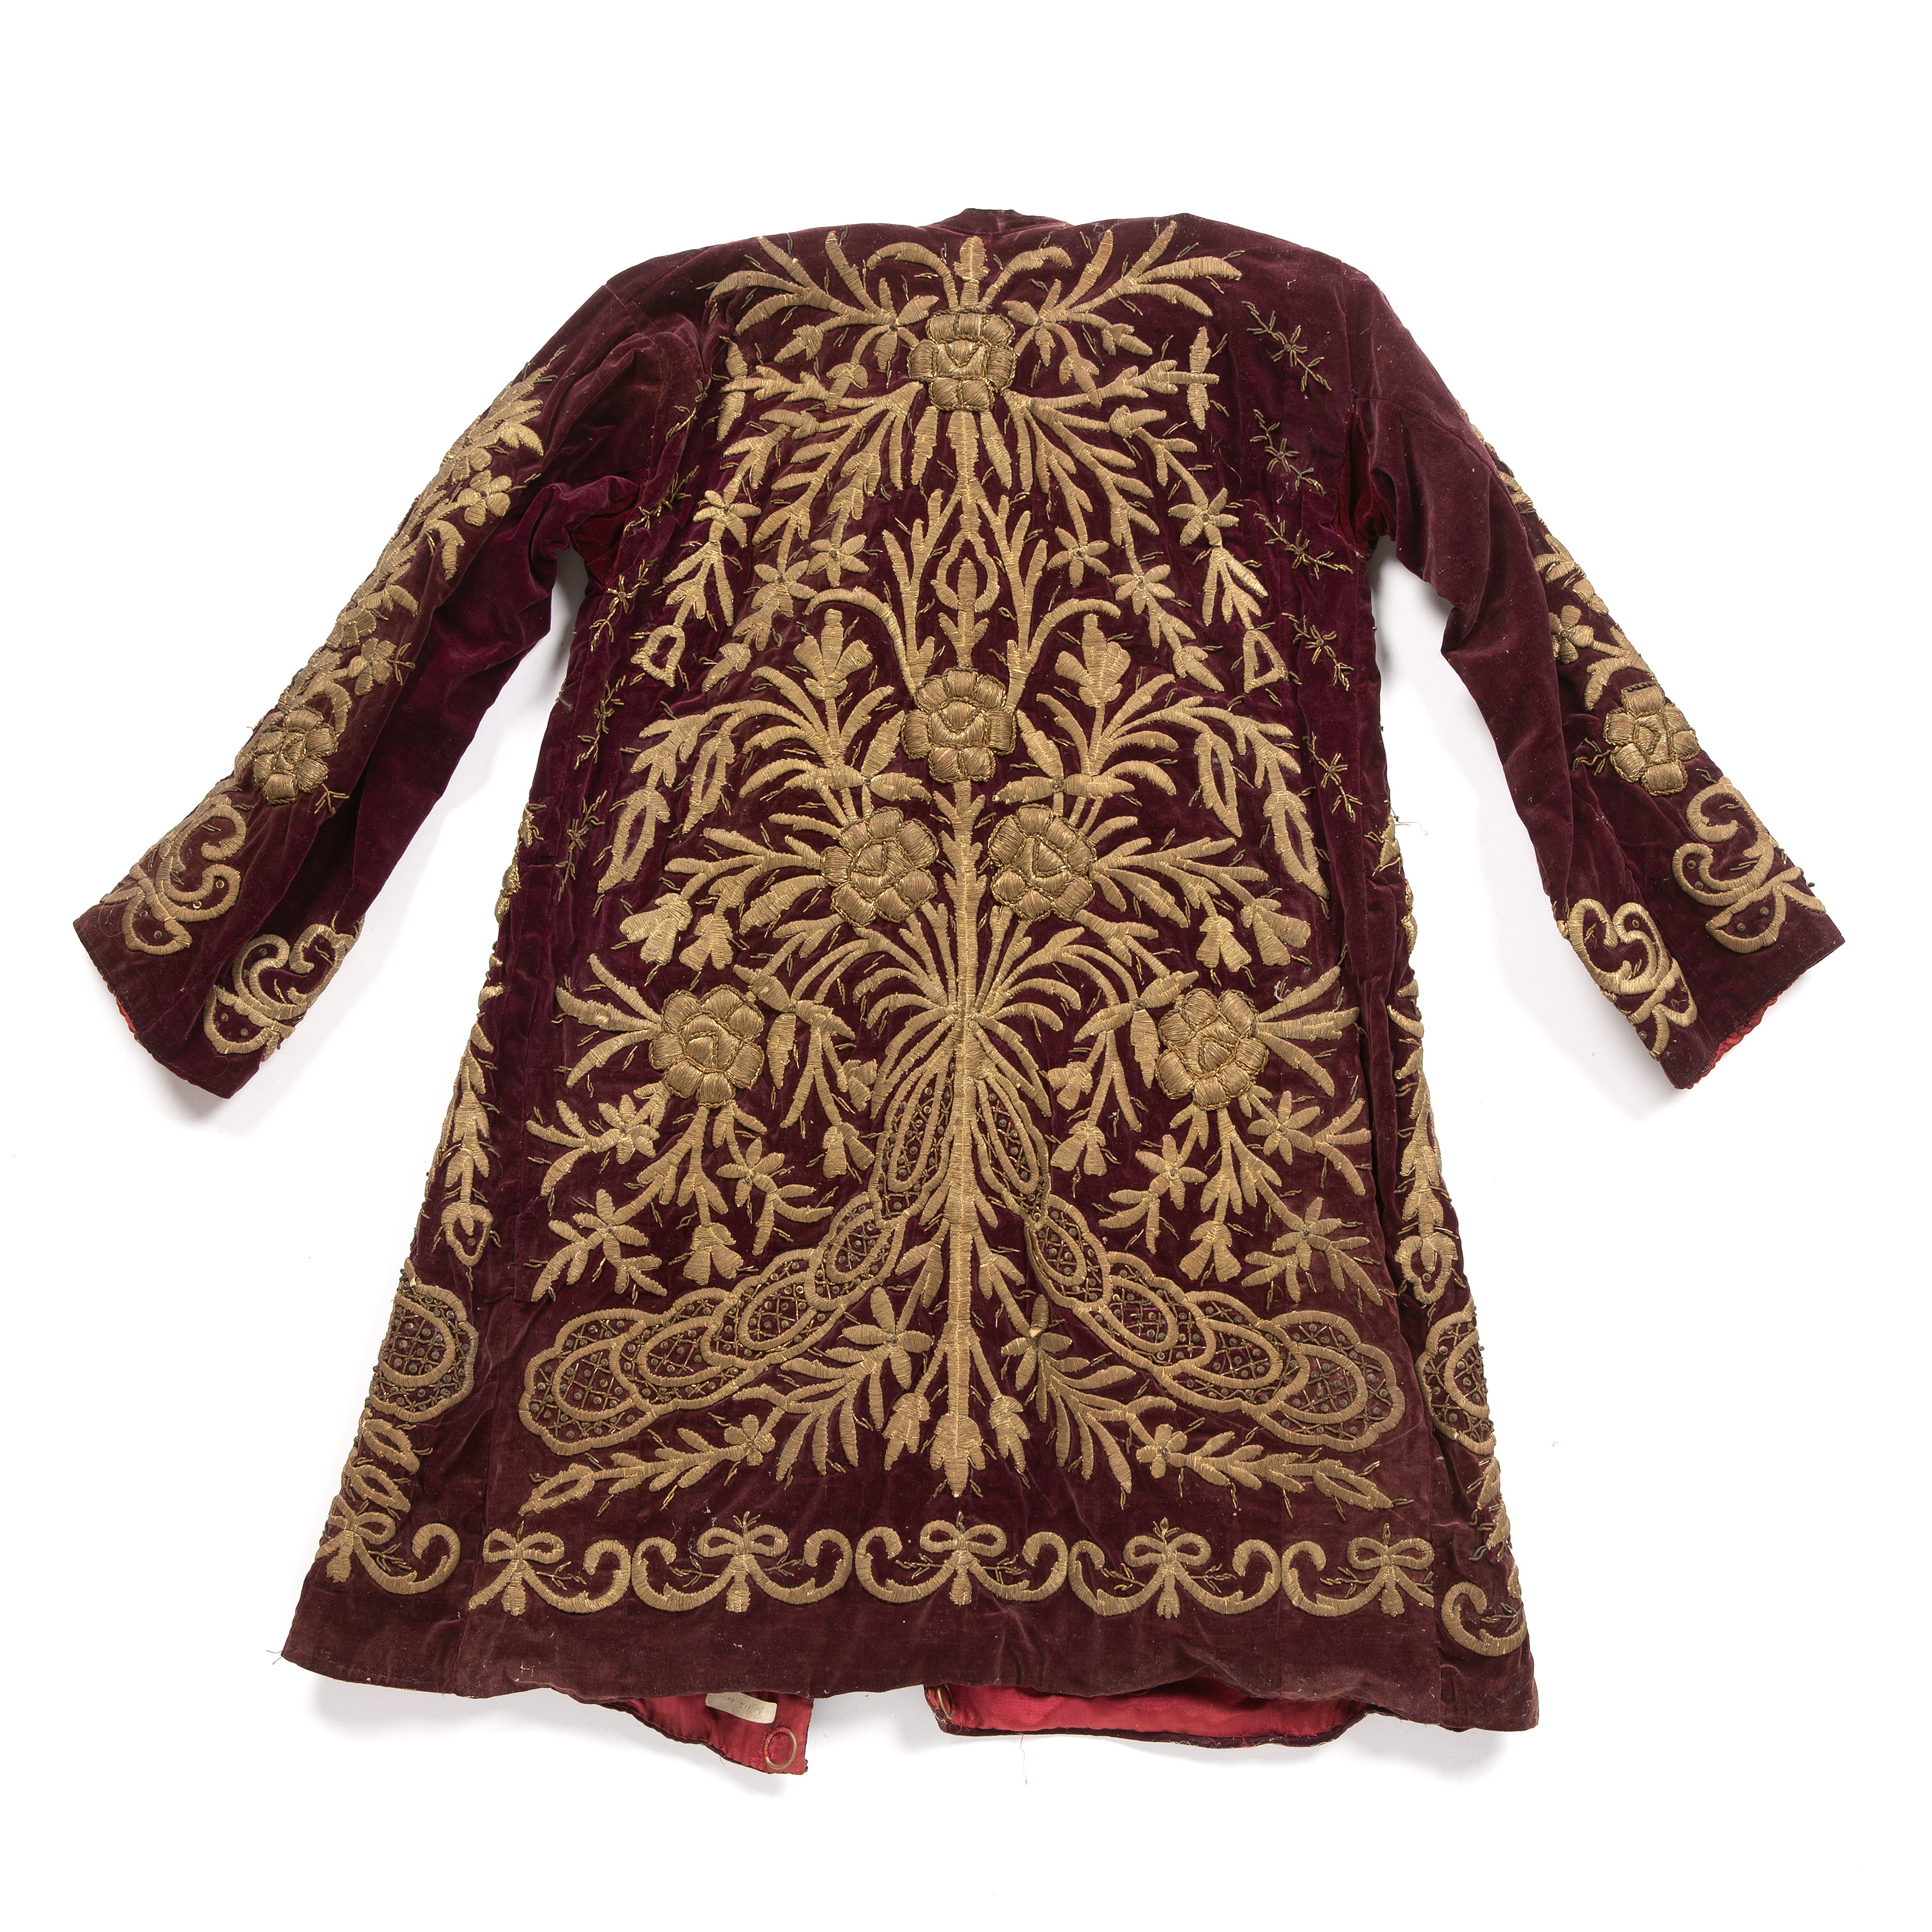 Embroidered velvet coat Ottoman deep burgundy ground, embroidered in gold with flowers and - Bild 2 aus 2